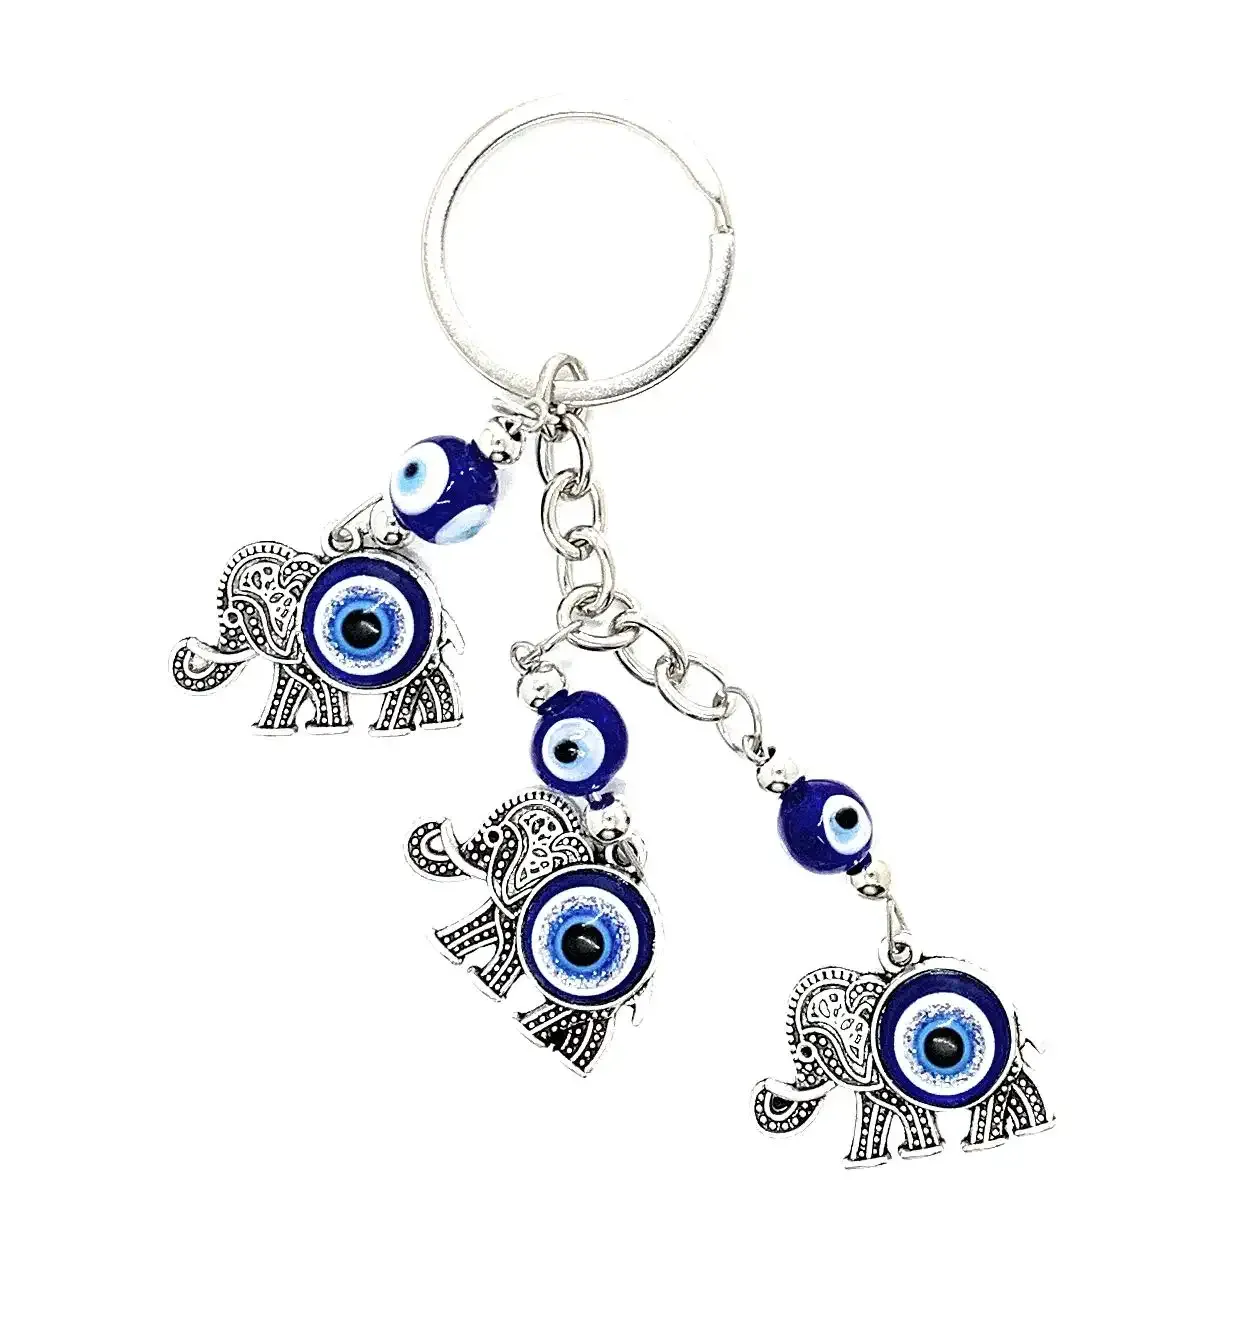 3ml turtle butterfly and elephant key chain set with nazars evil eye bead for protection on keychain good luck pocket charm keychains for women spiritual animal